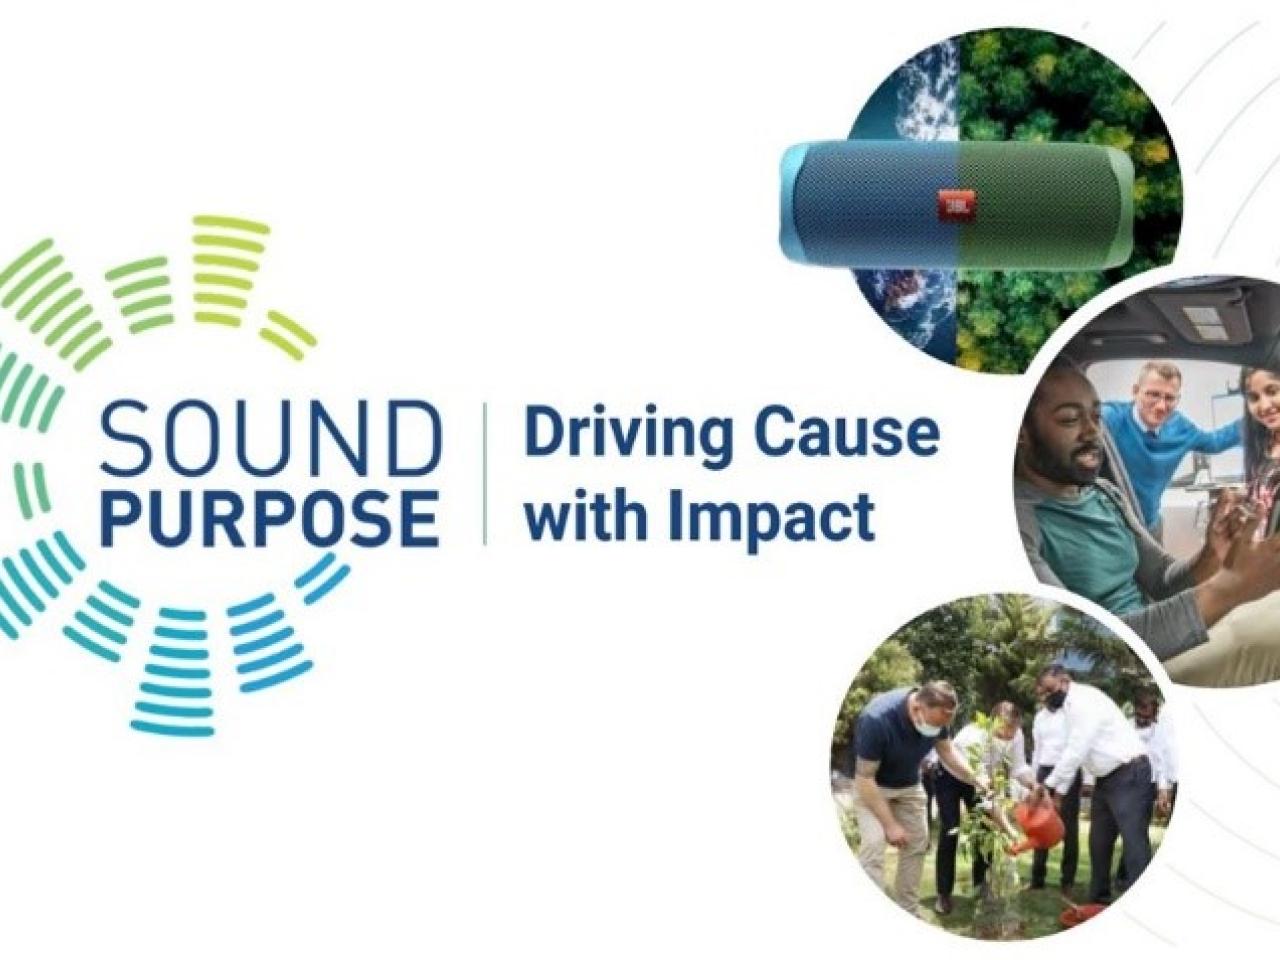 HARMAN: Sound Purpose; Driving Cause with Impact.